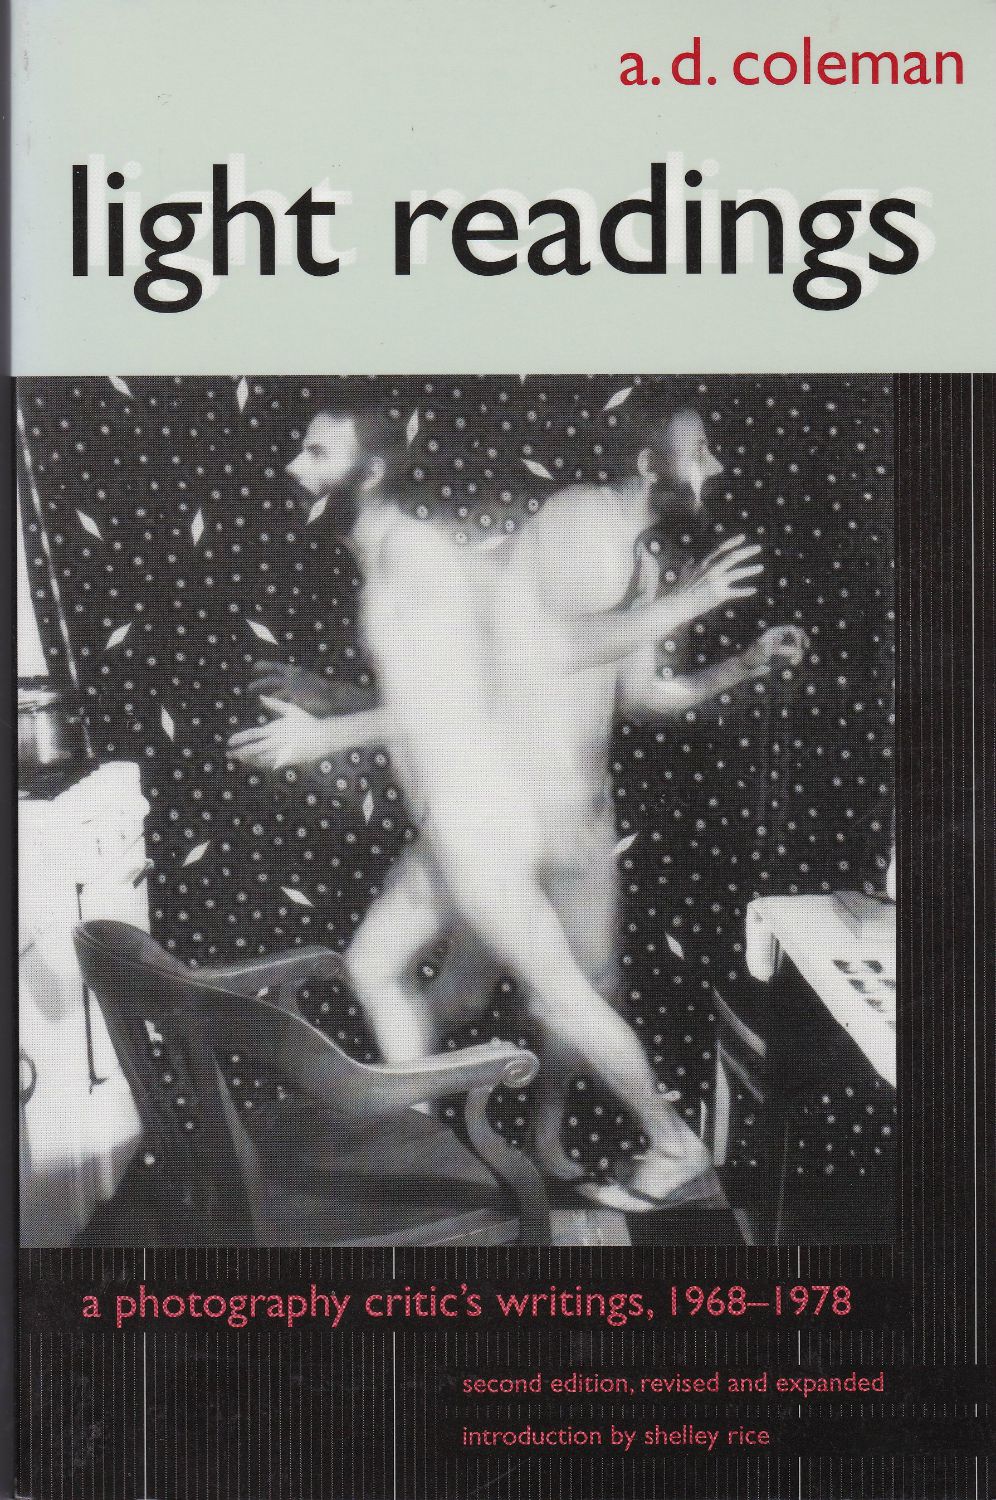 Light readings : a photography critic's writings, 1968-1978